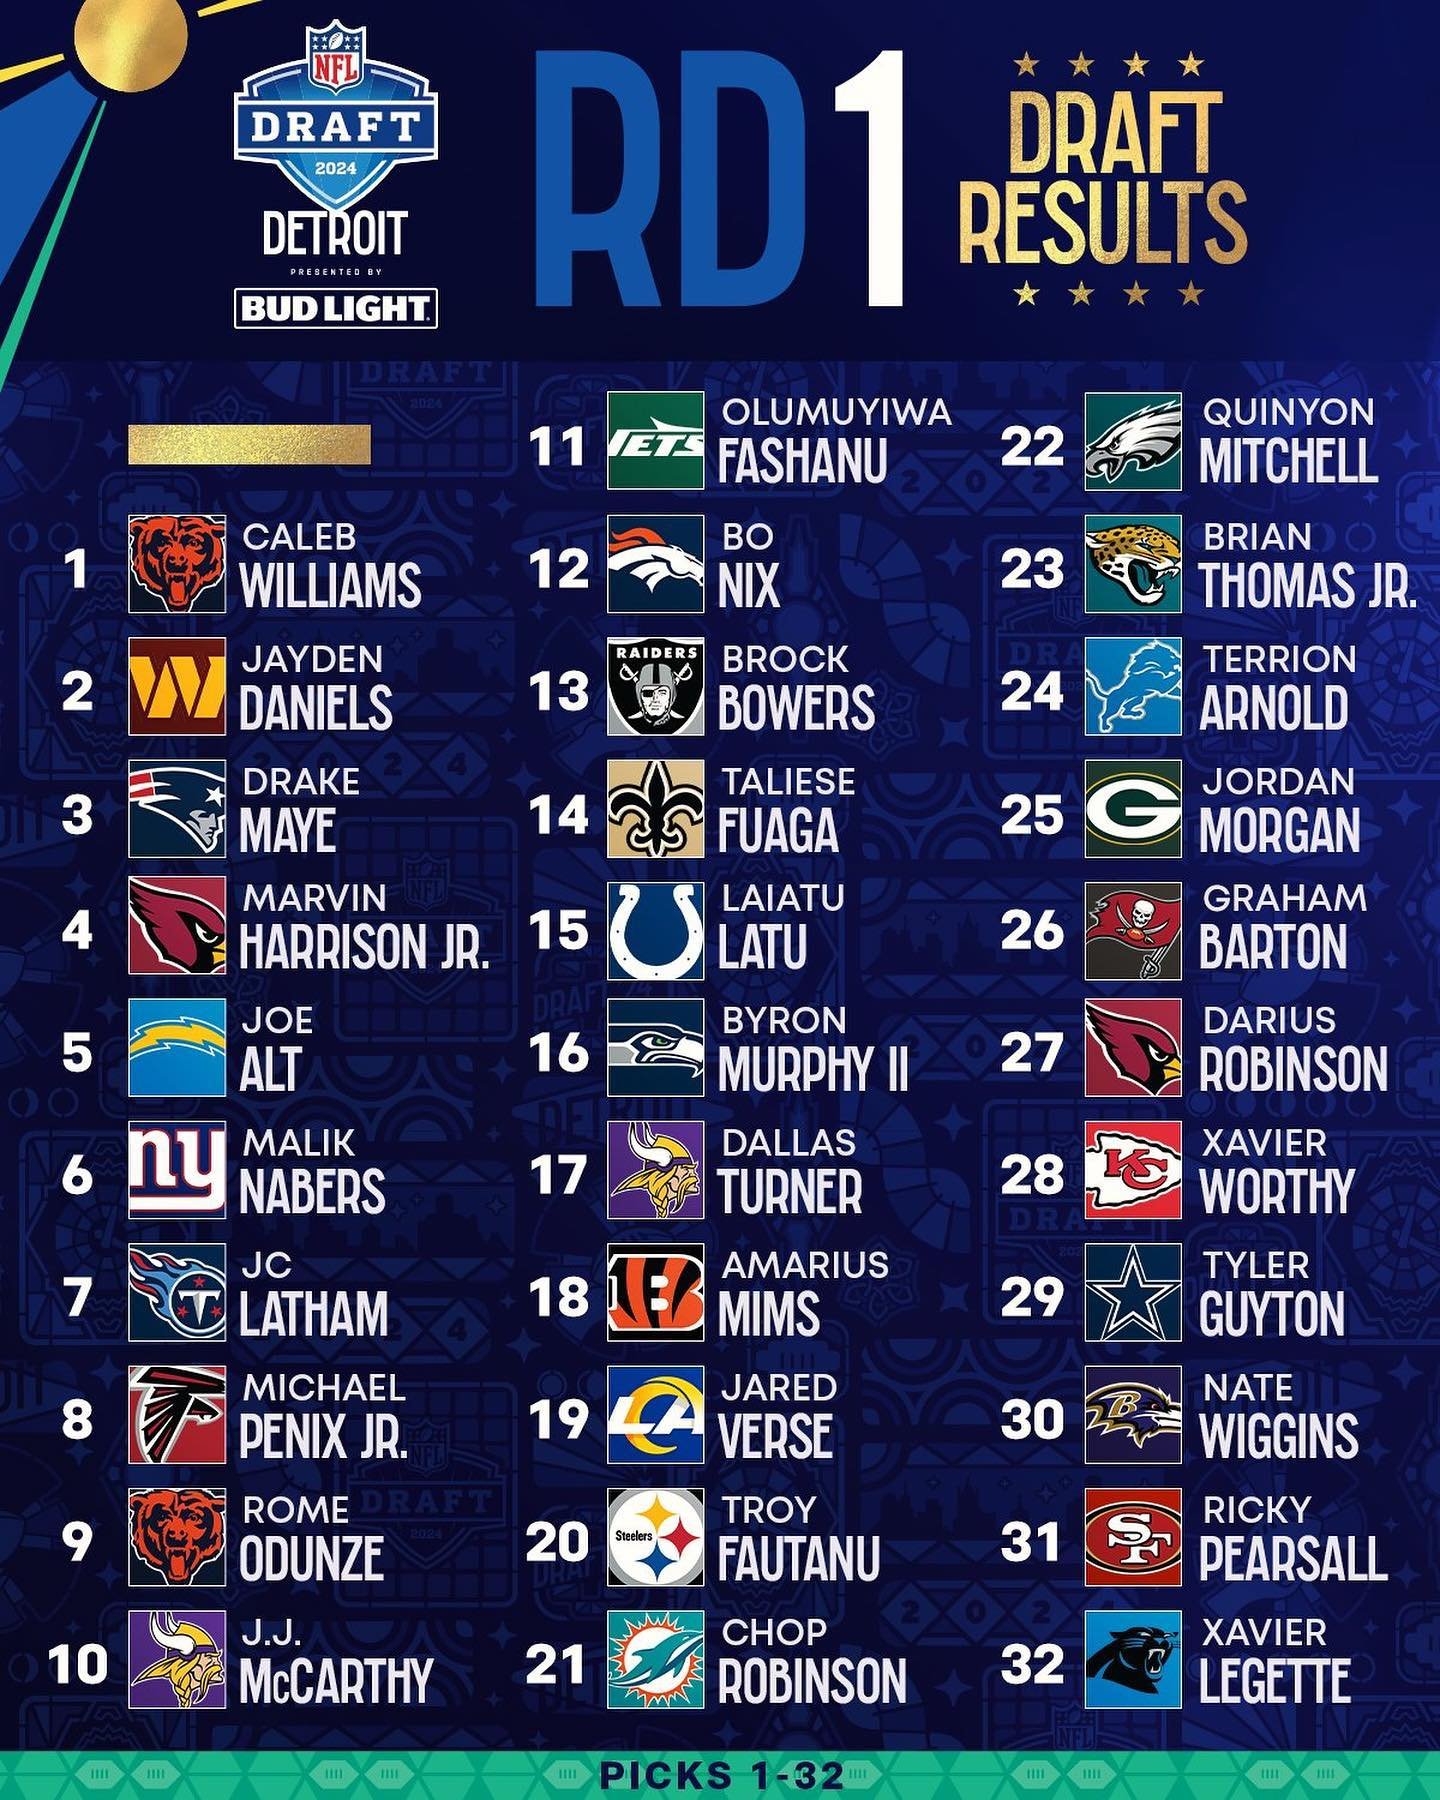 Results after the first round of the draft. Are you happy with your team&rsquo;s selection